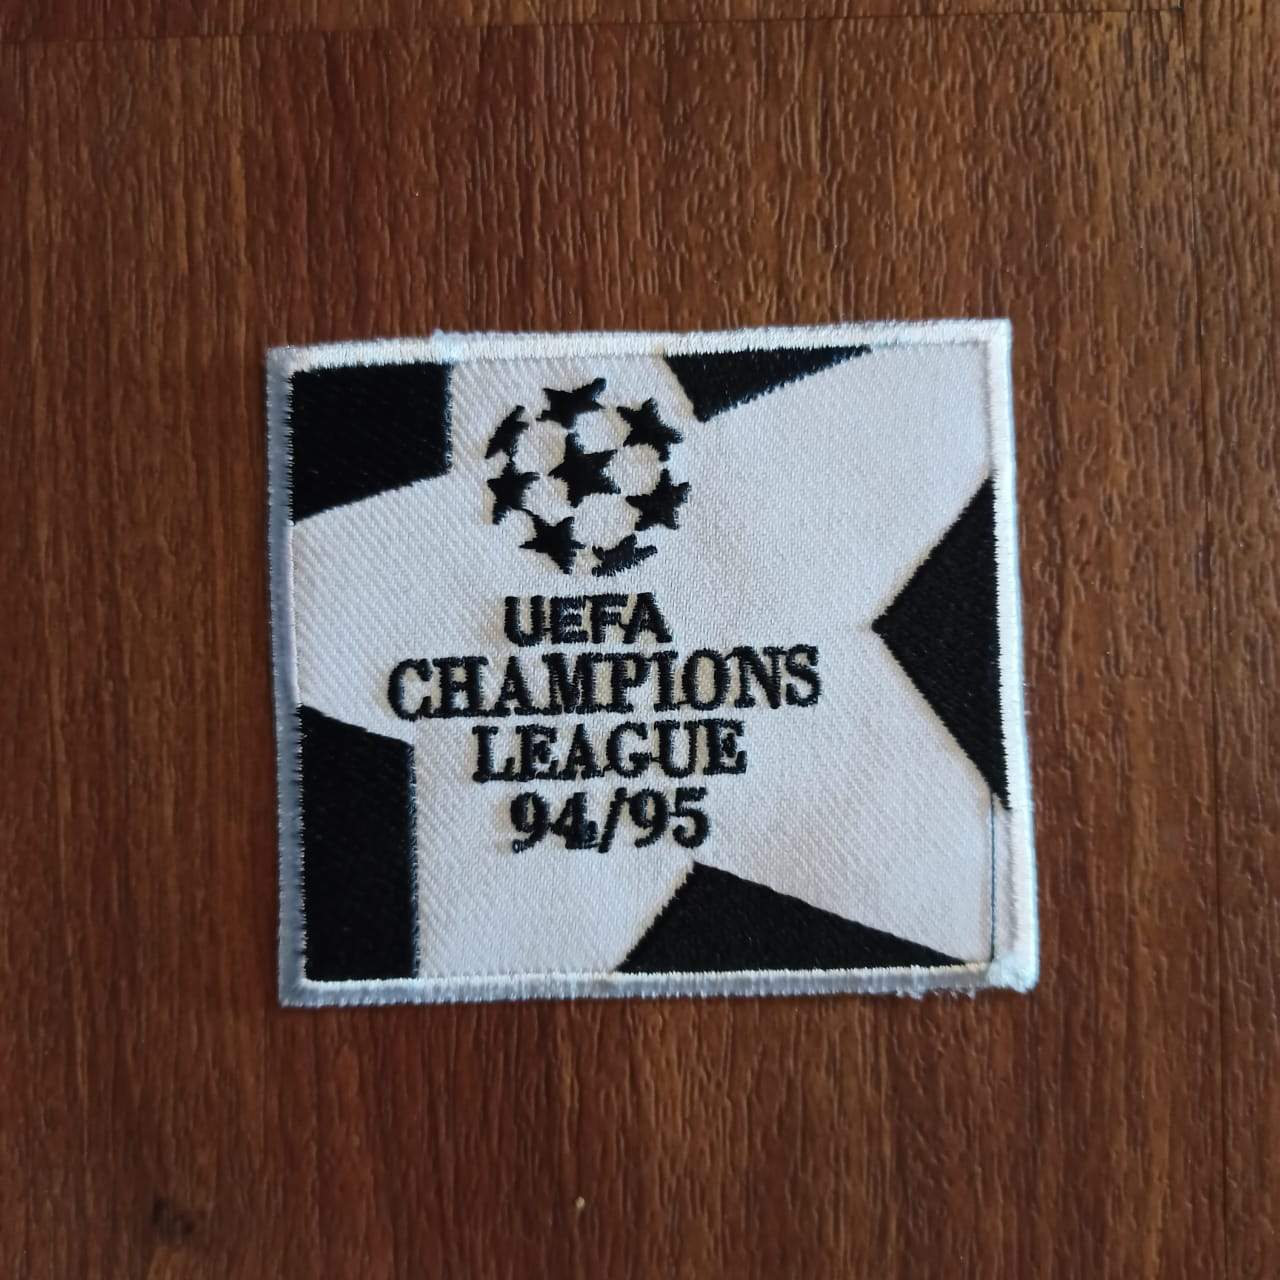 1994/95 UEFA Champions League Starball Patch